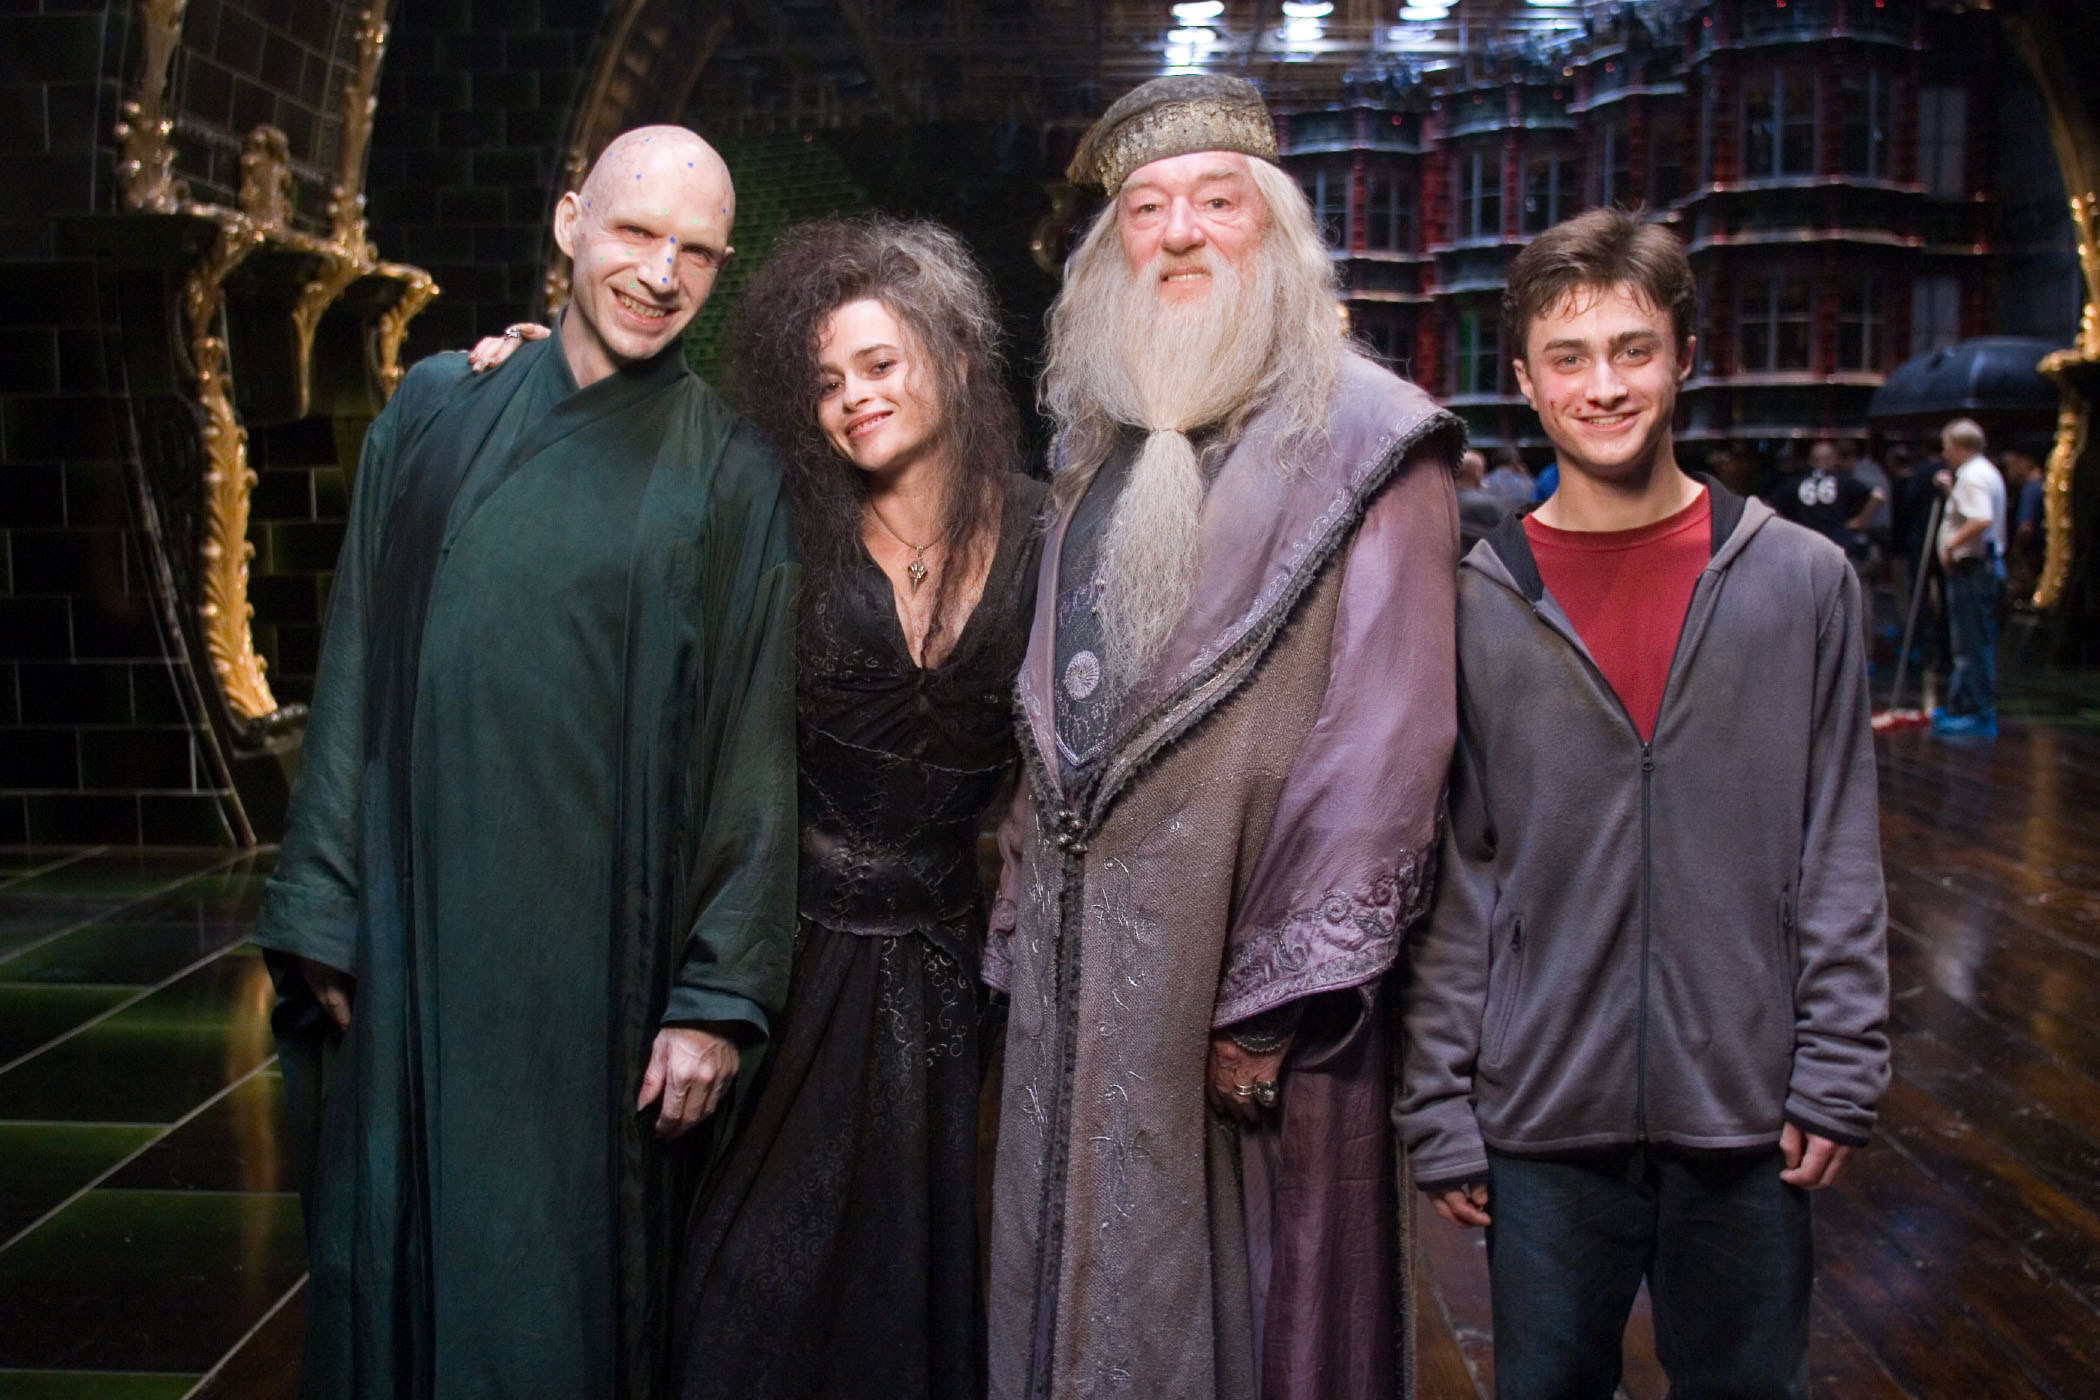 Bonham Carter, Fiennes, Radcliffe, and Gambon posing together